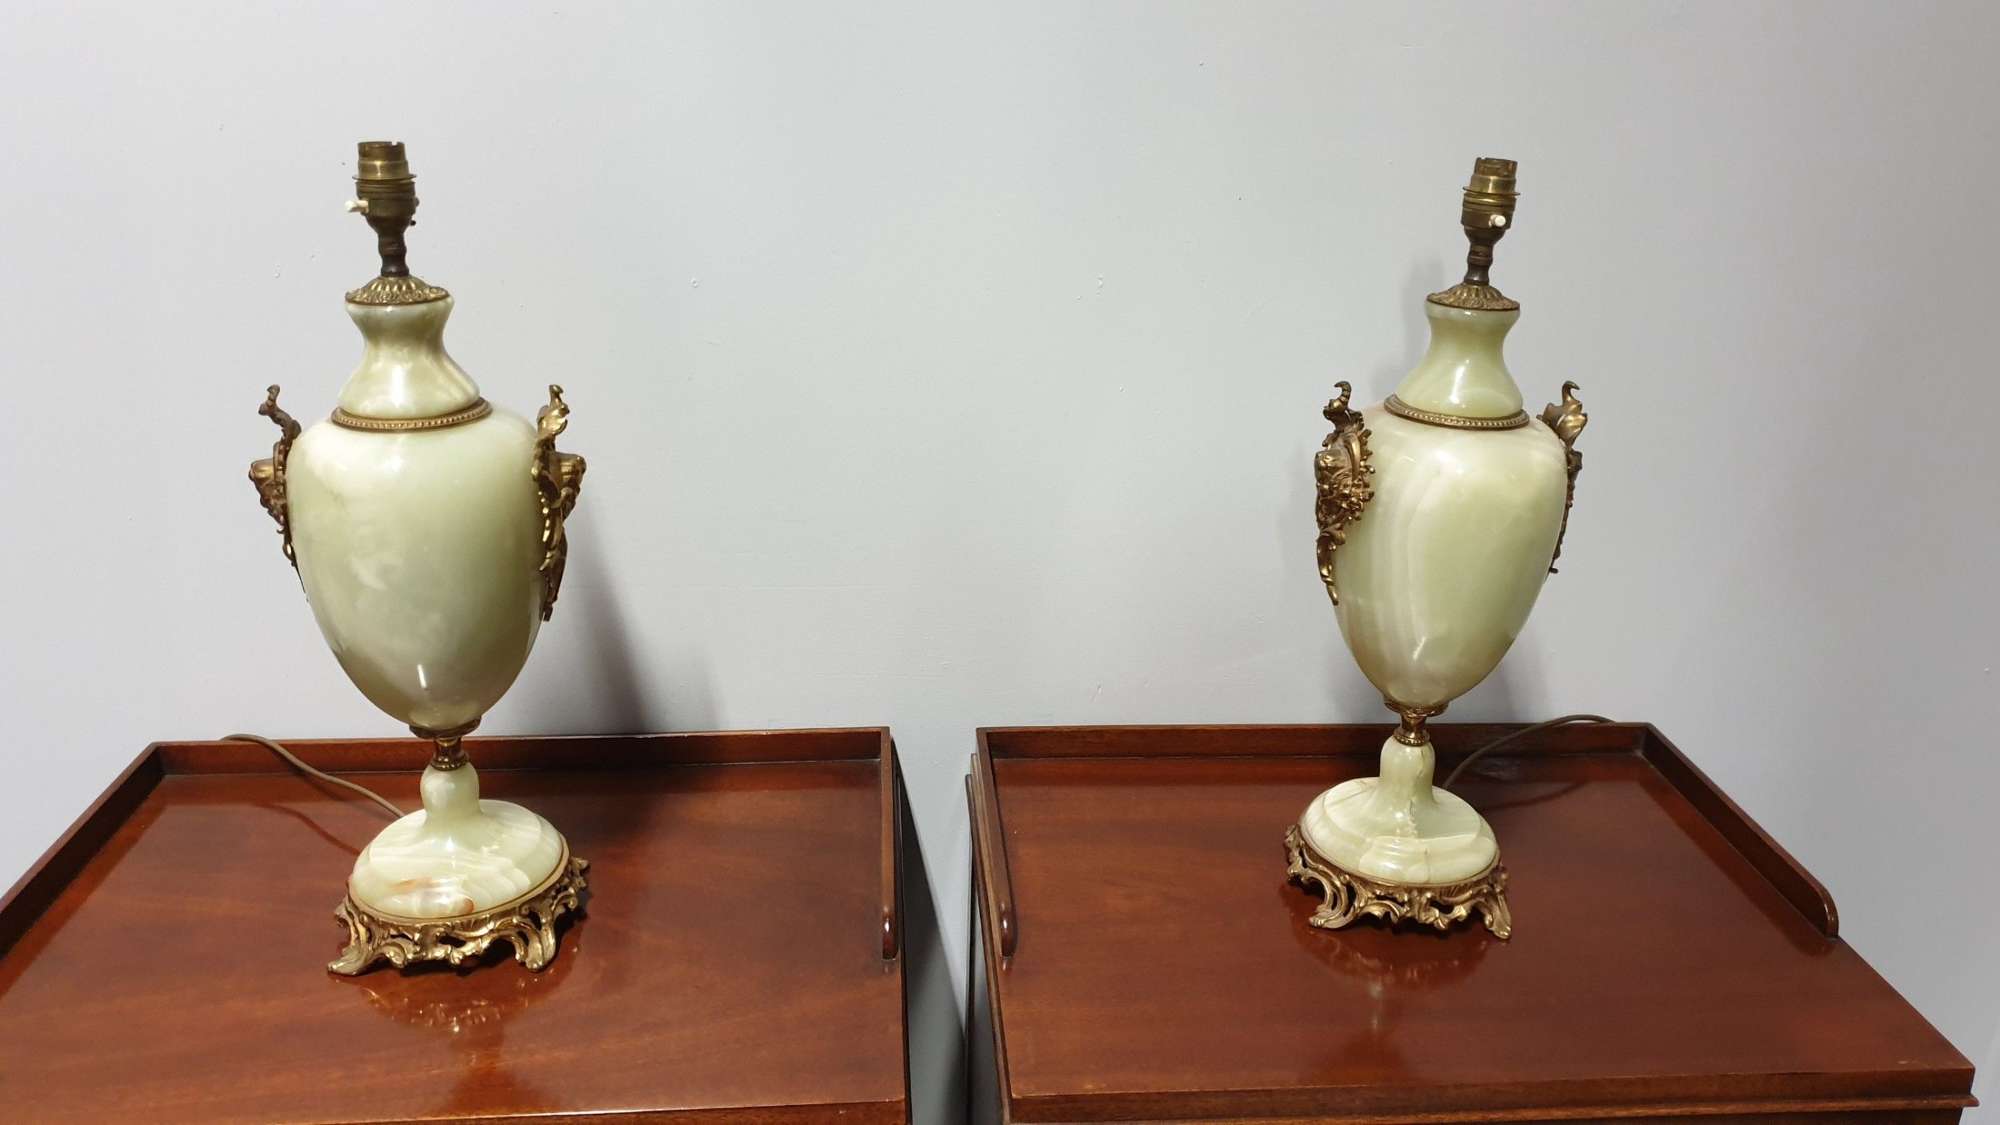 Wonderful Pair Of Large Onyx And Ormolu Lamps